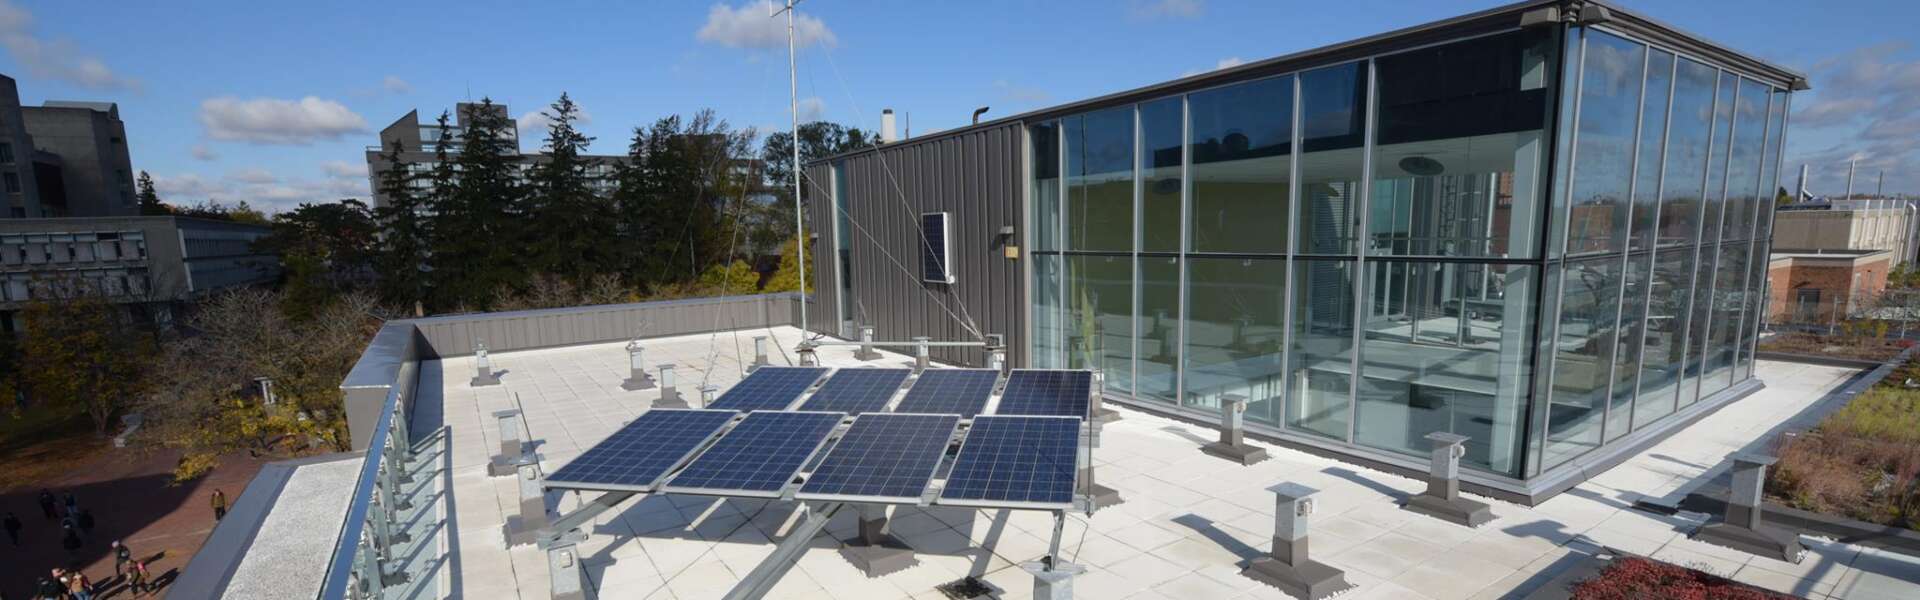 Sustainable Energy Lab on the rooftop of the Thornbrough Building